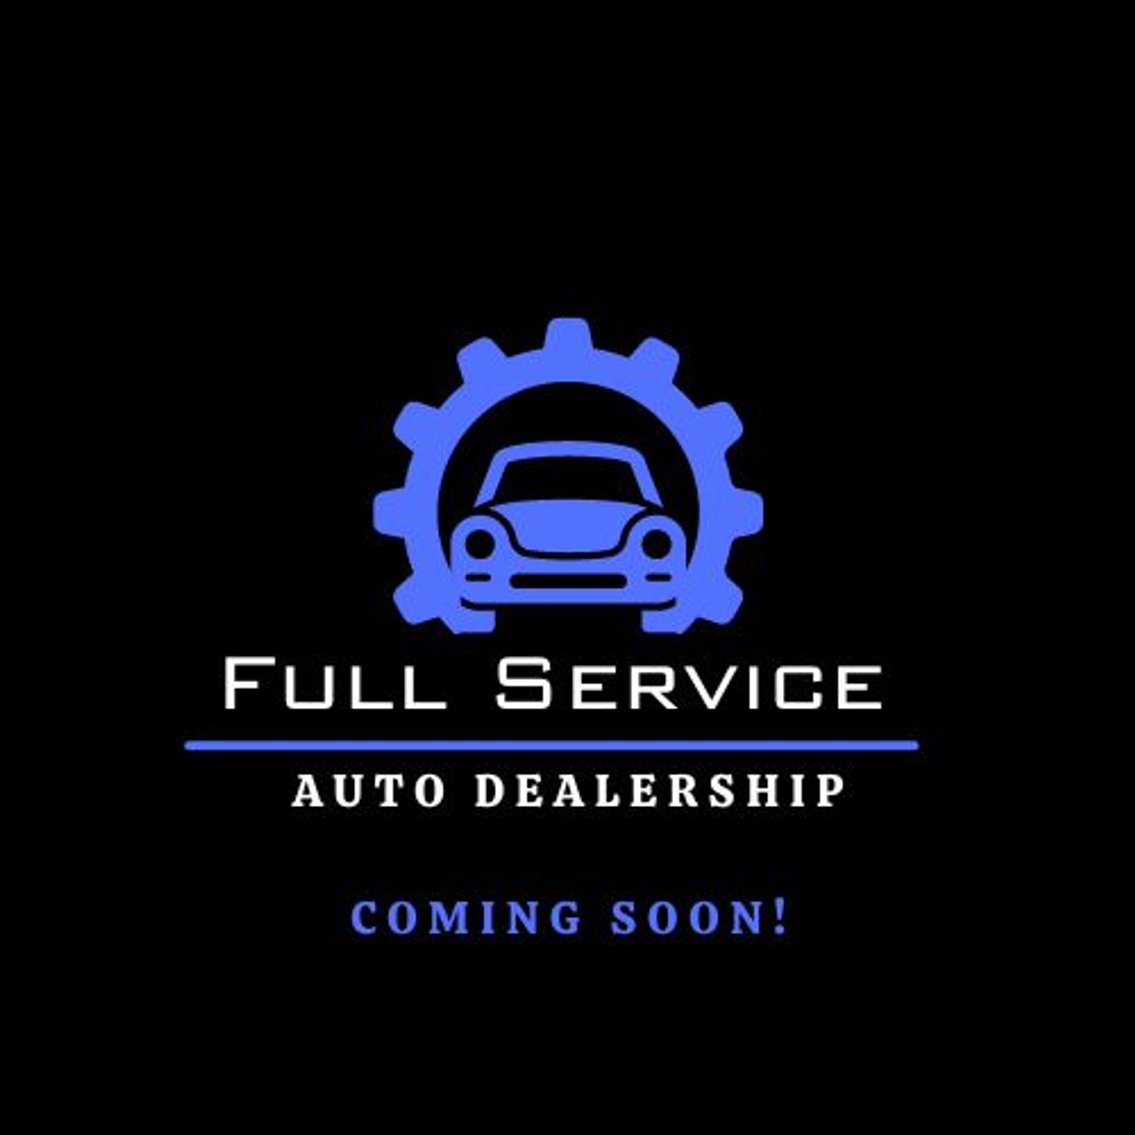 Full Service Automotive Dealership - Coming Soon!